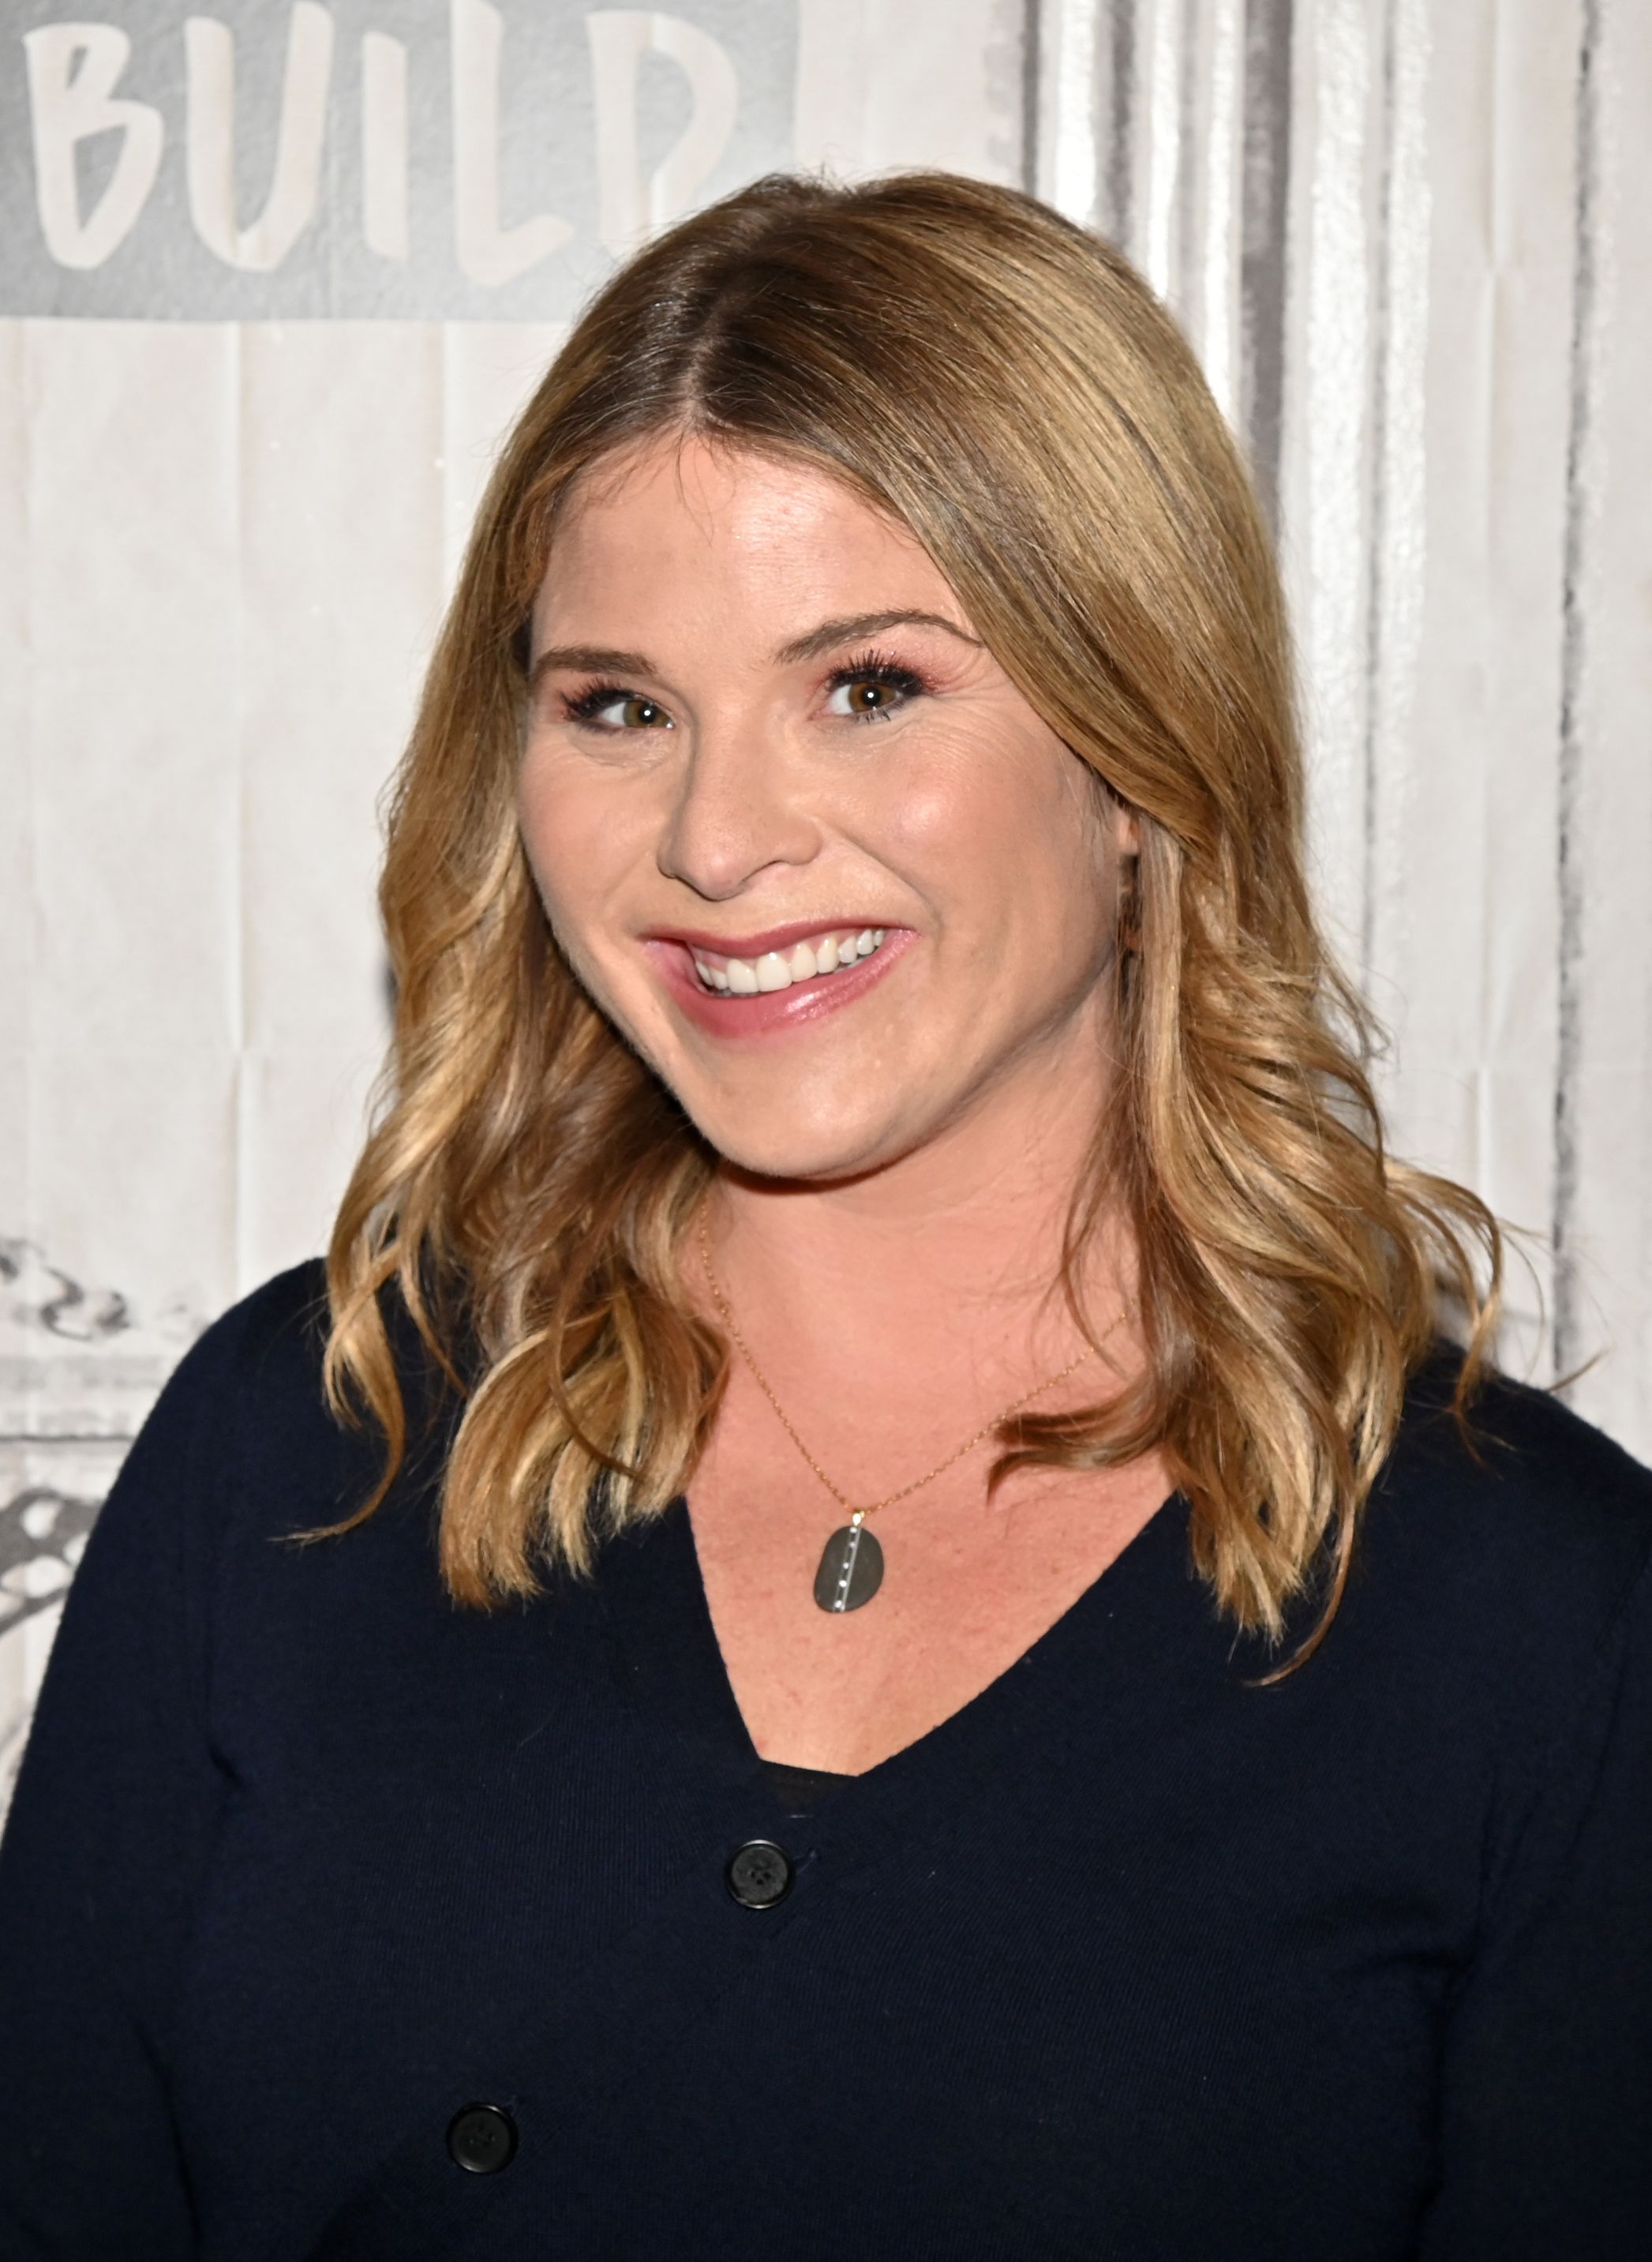 Jenna Bush Hager visits Build at Build Studio on April 08, 2019 in New York City | Photo: Getty Images